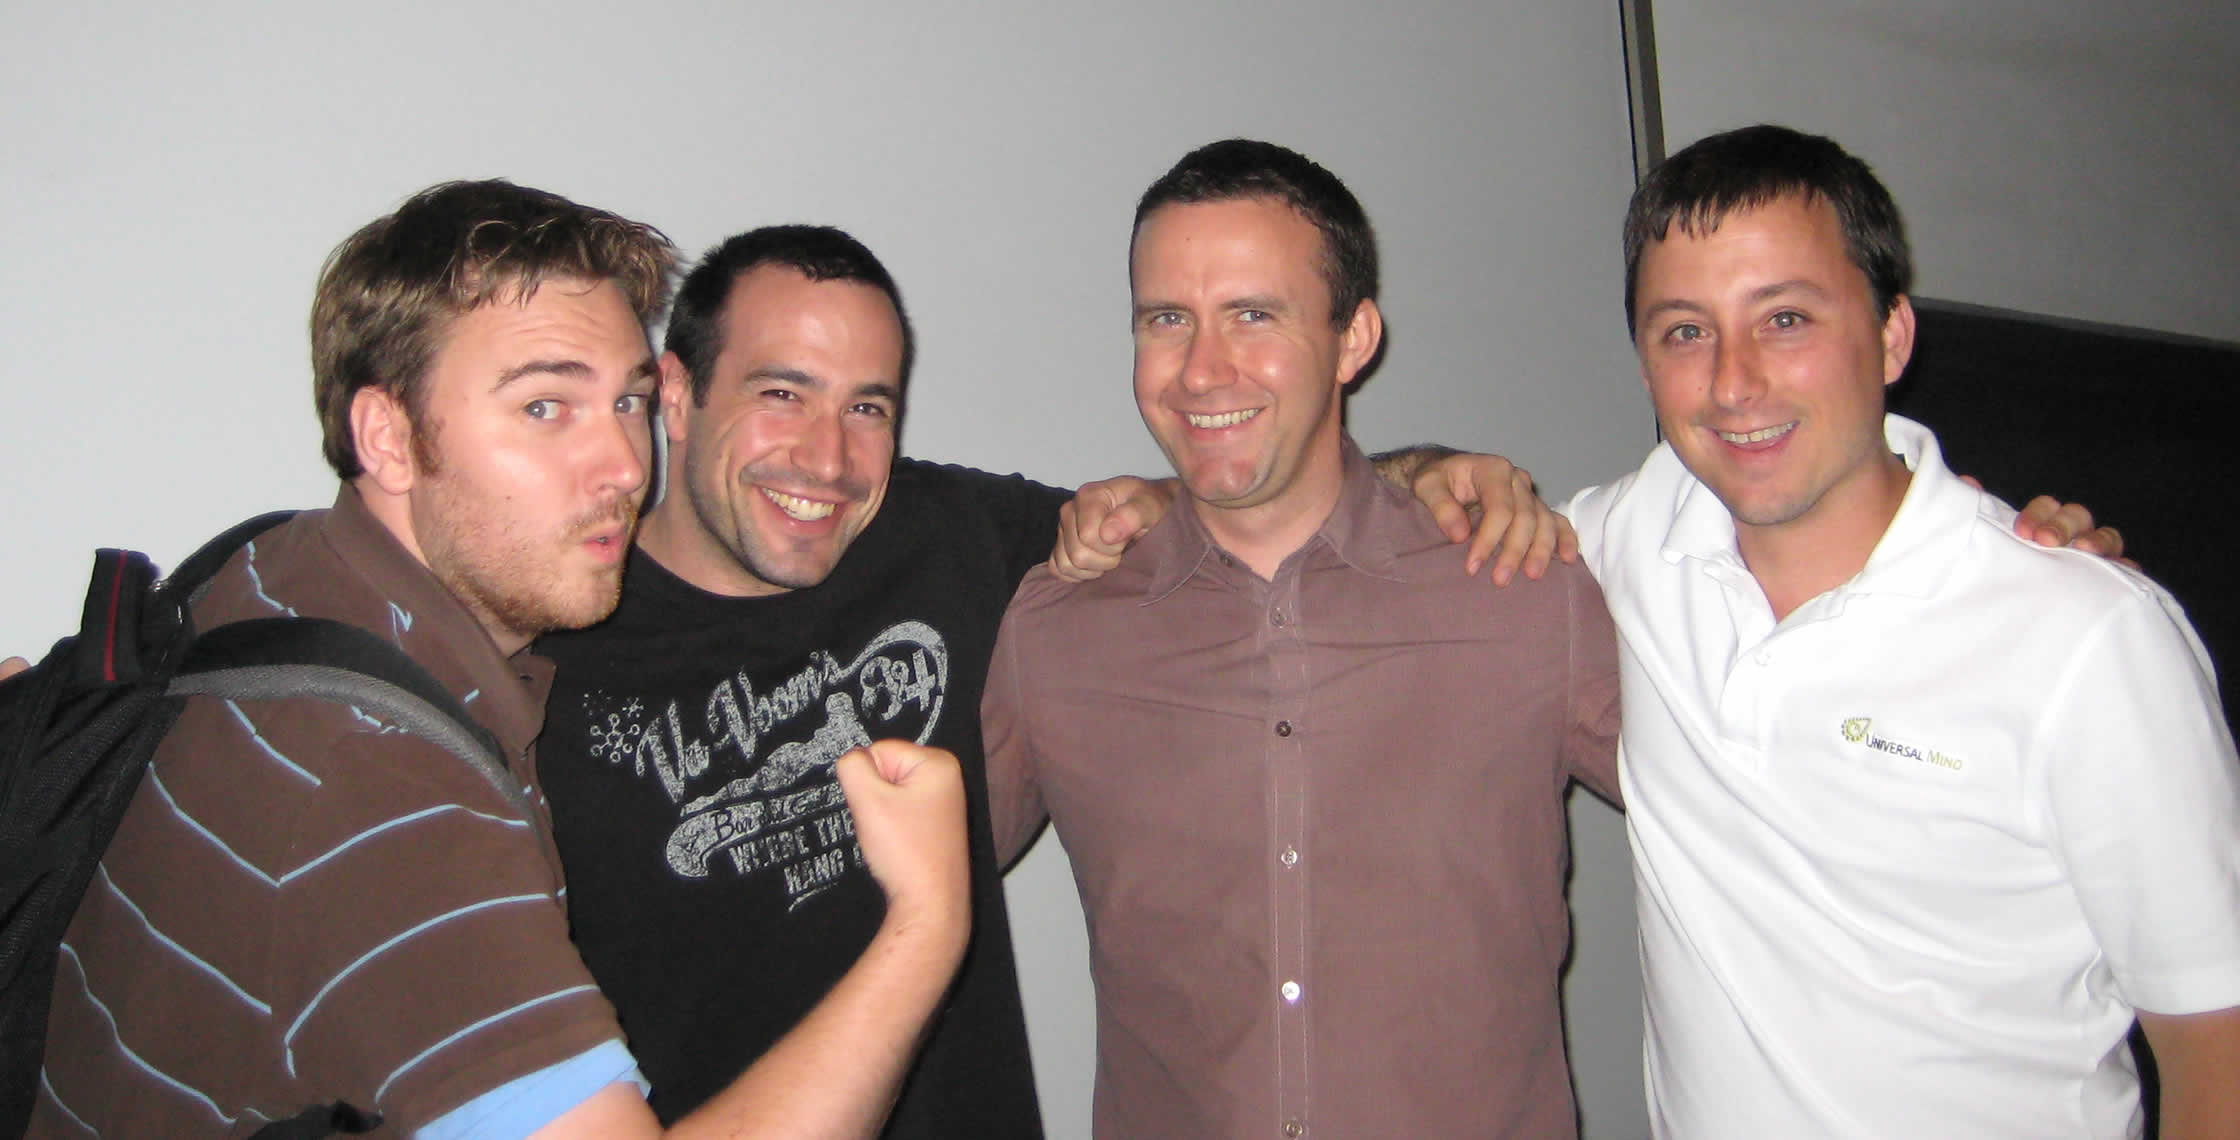 Ben Nadel at the New York ColdFusion User Group (Jul. 2008) with: Simon Free and Peter Bell and Dan Wilson